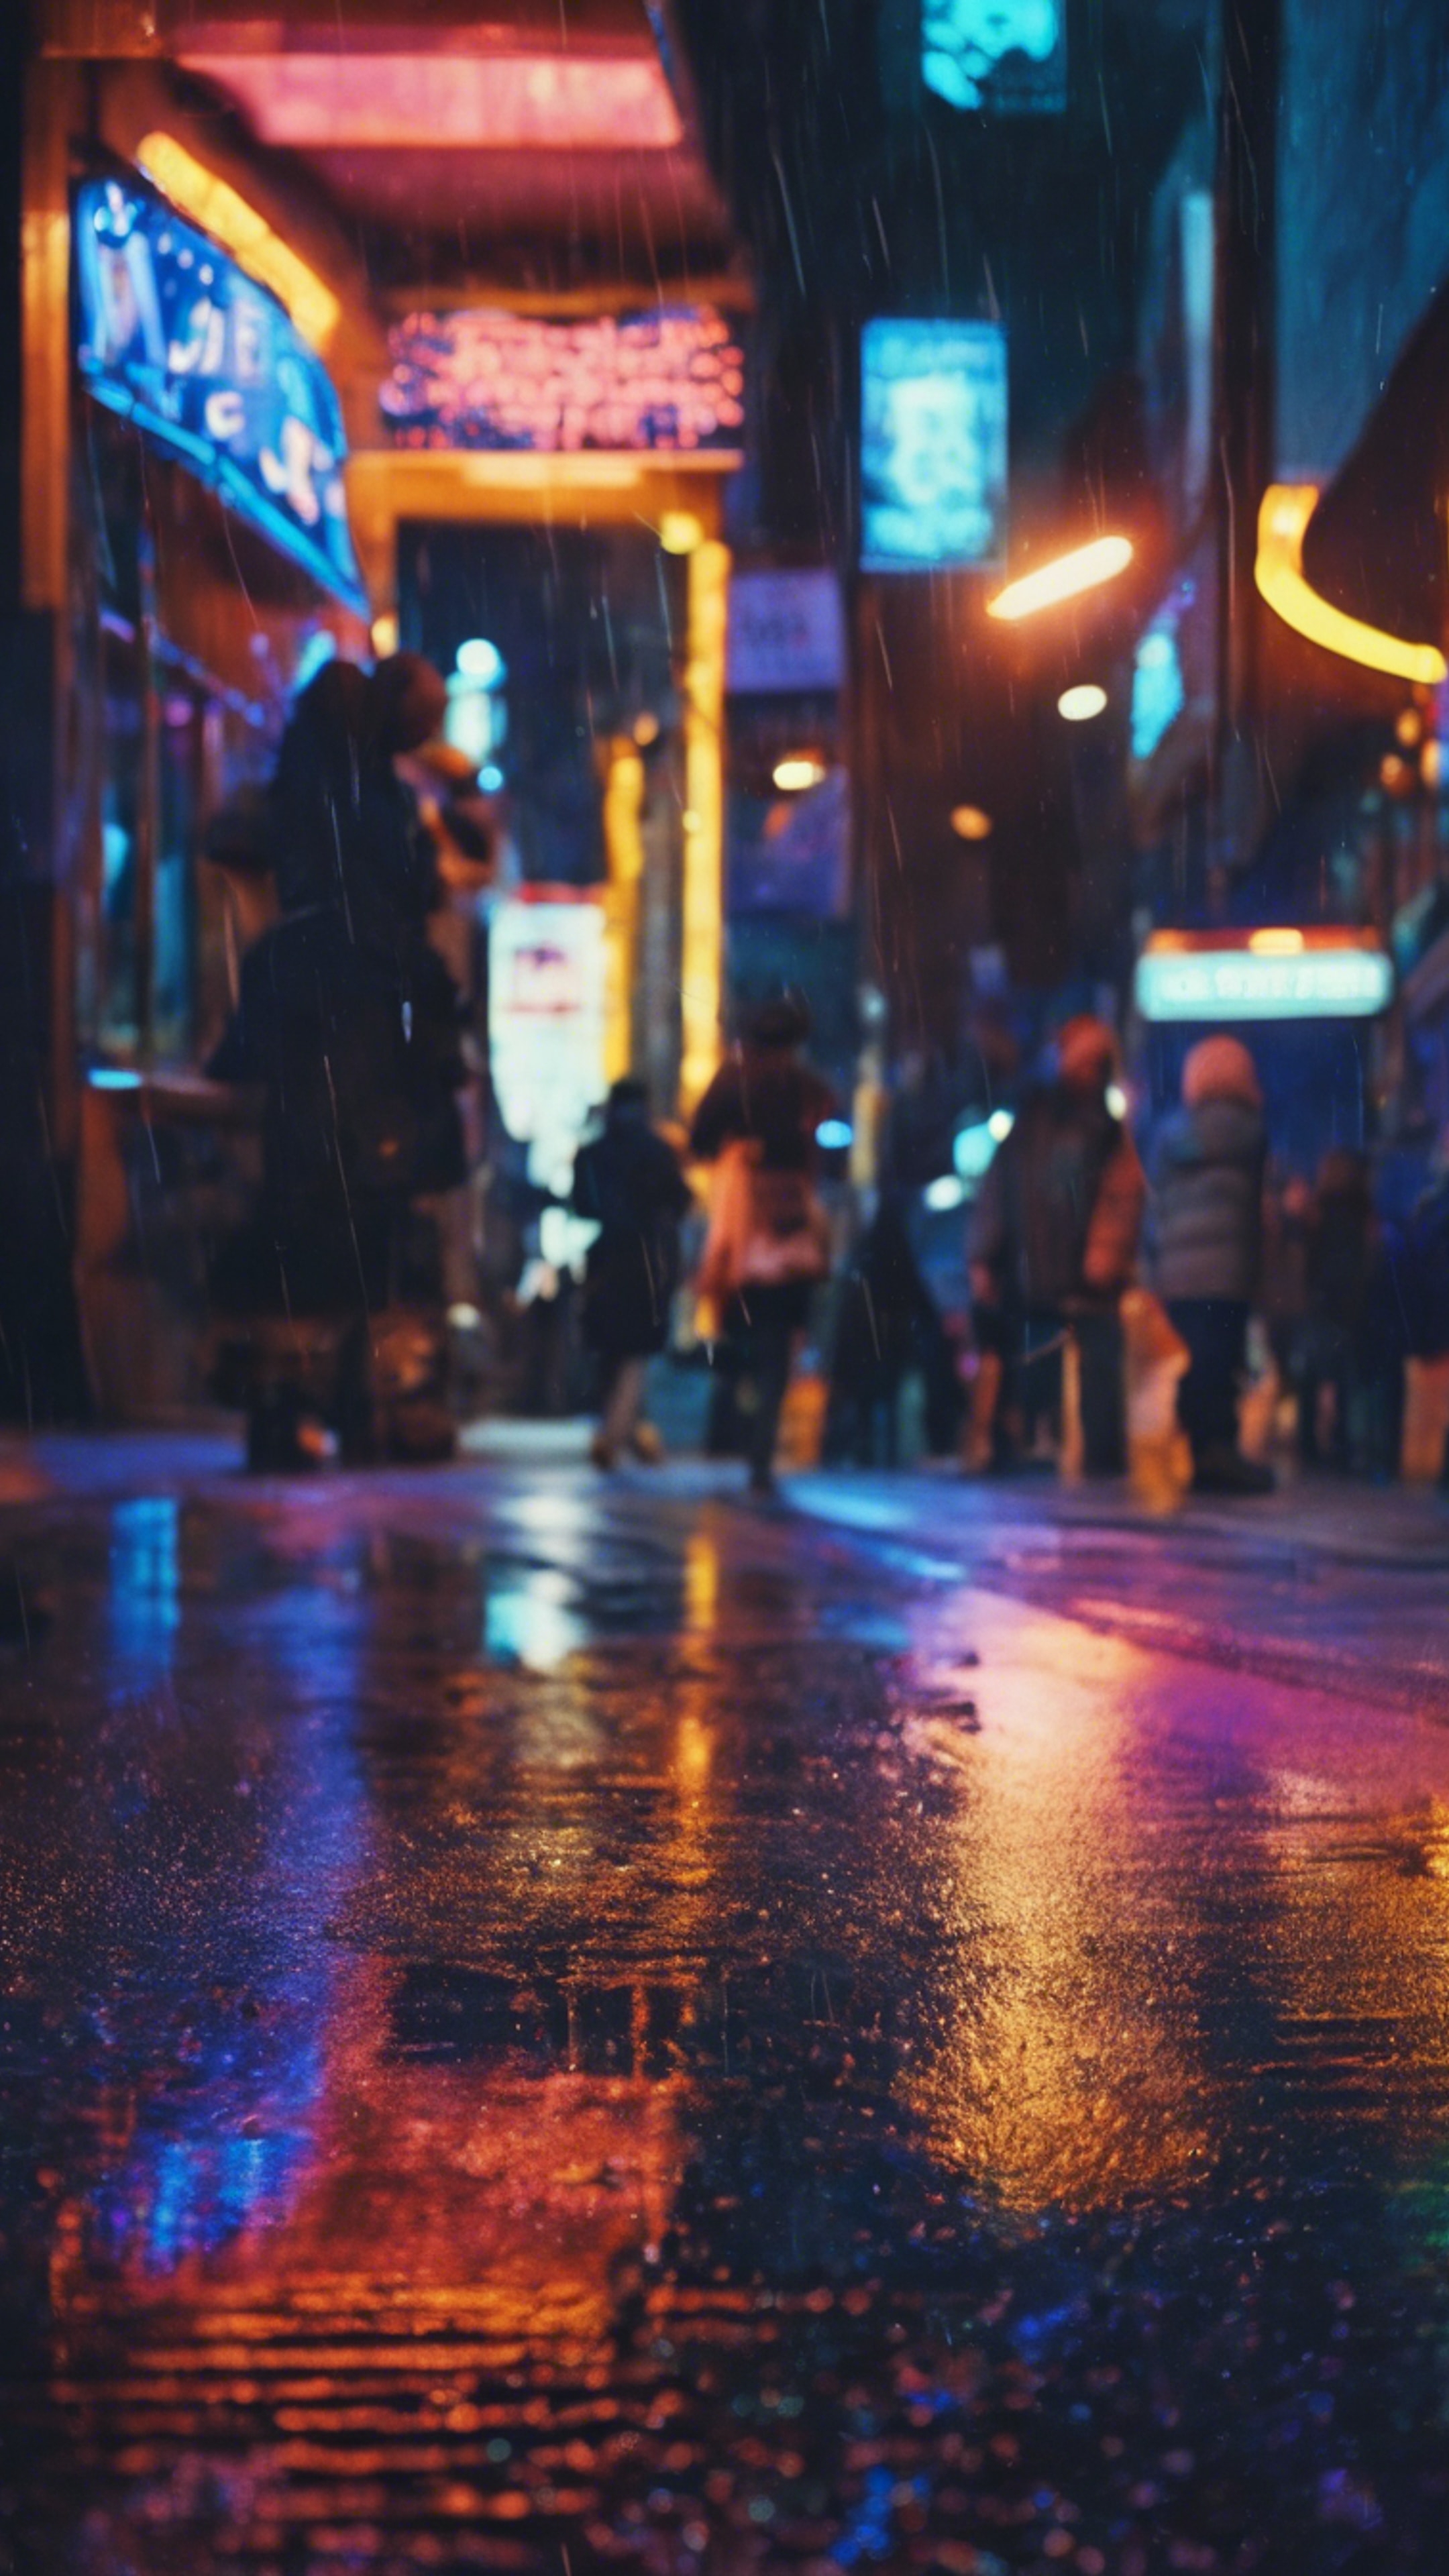 A downtown area in the 70s with neon lights reflecting off a wet royal blue pavement. Wallpaper[cea0268f8c1e405996ef]